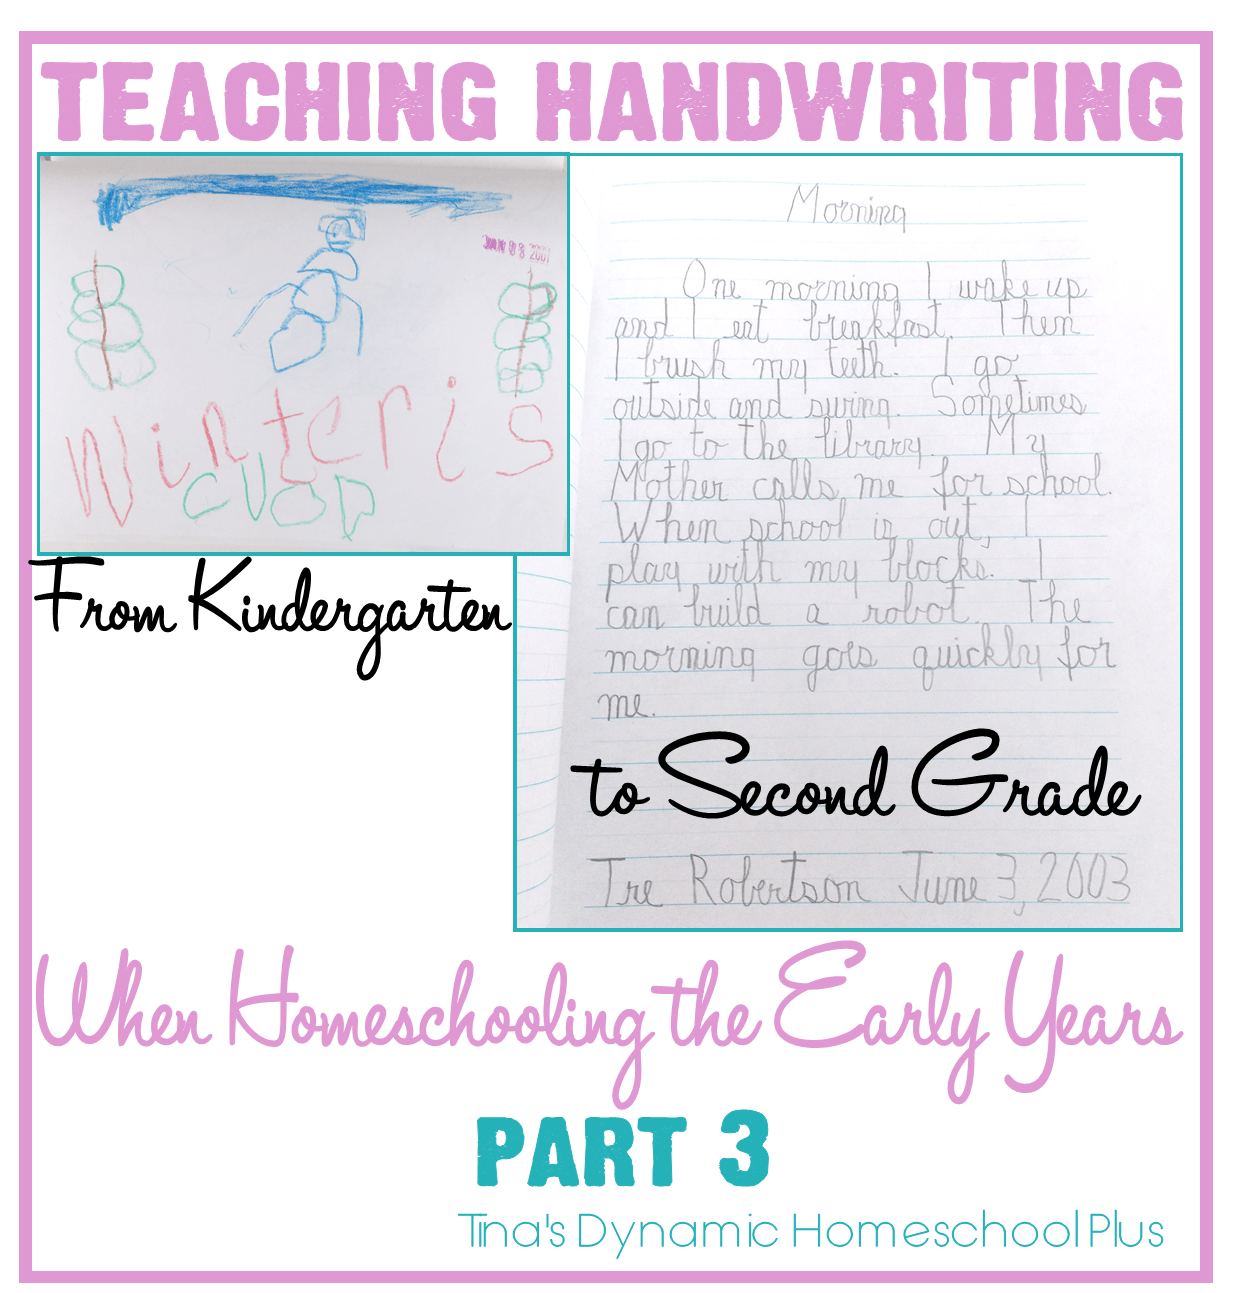 Teaching Handwriting When Homeschooling the Early Years Part 3-1